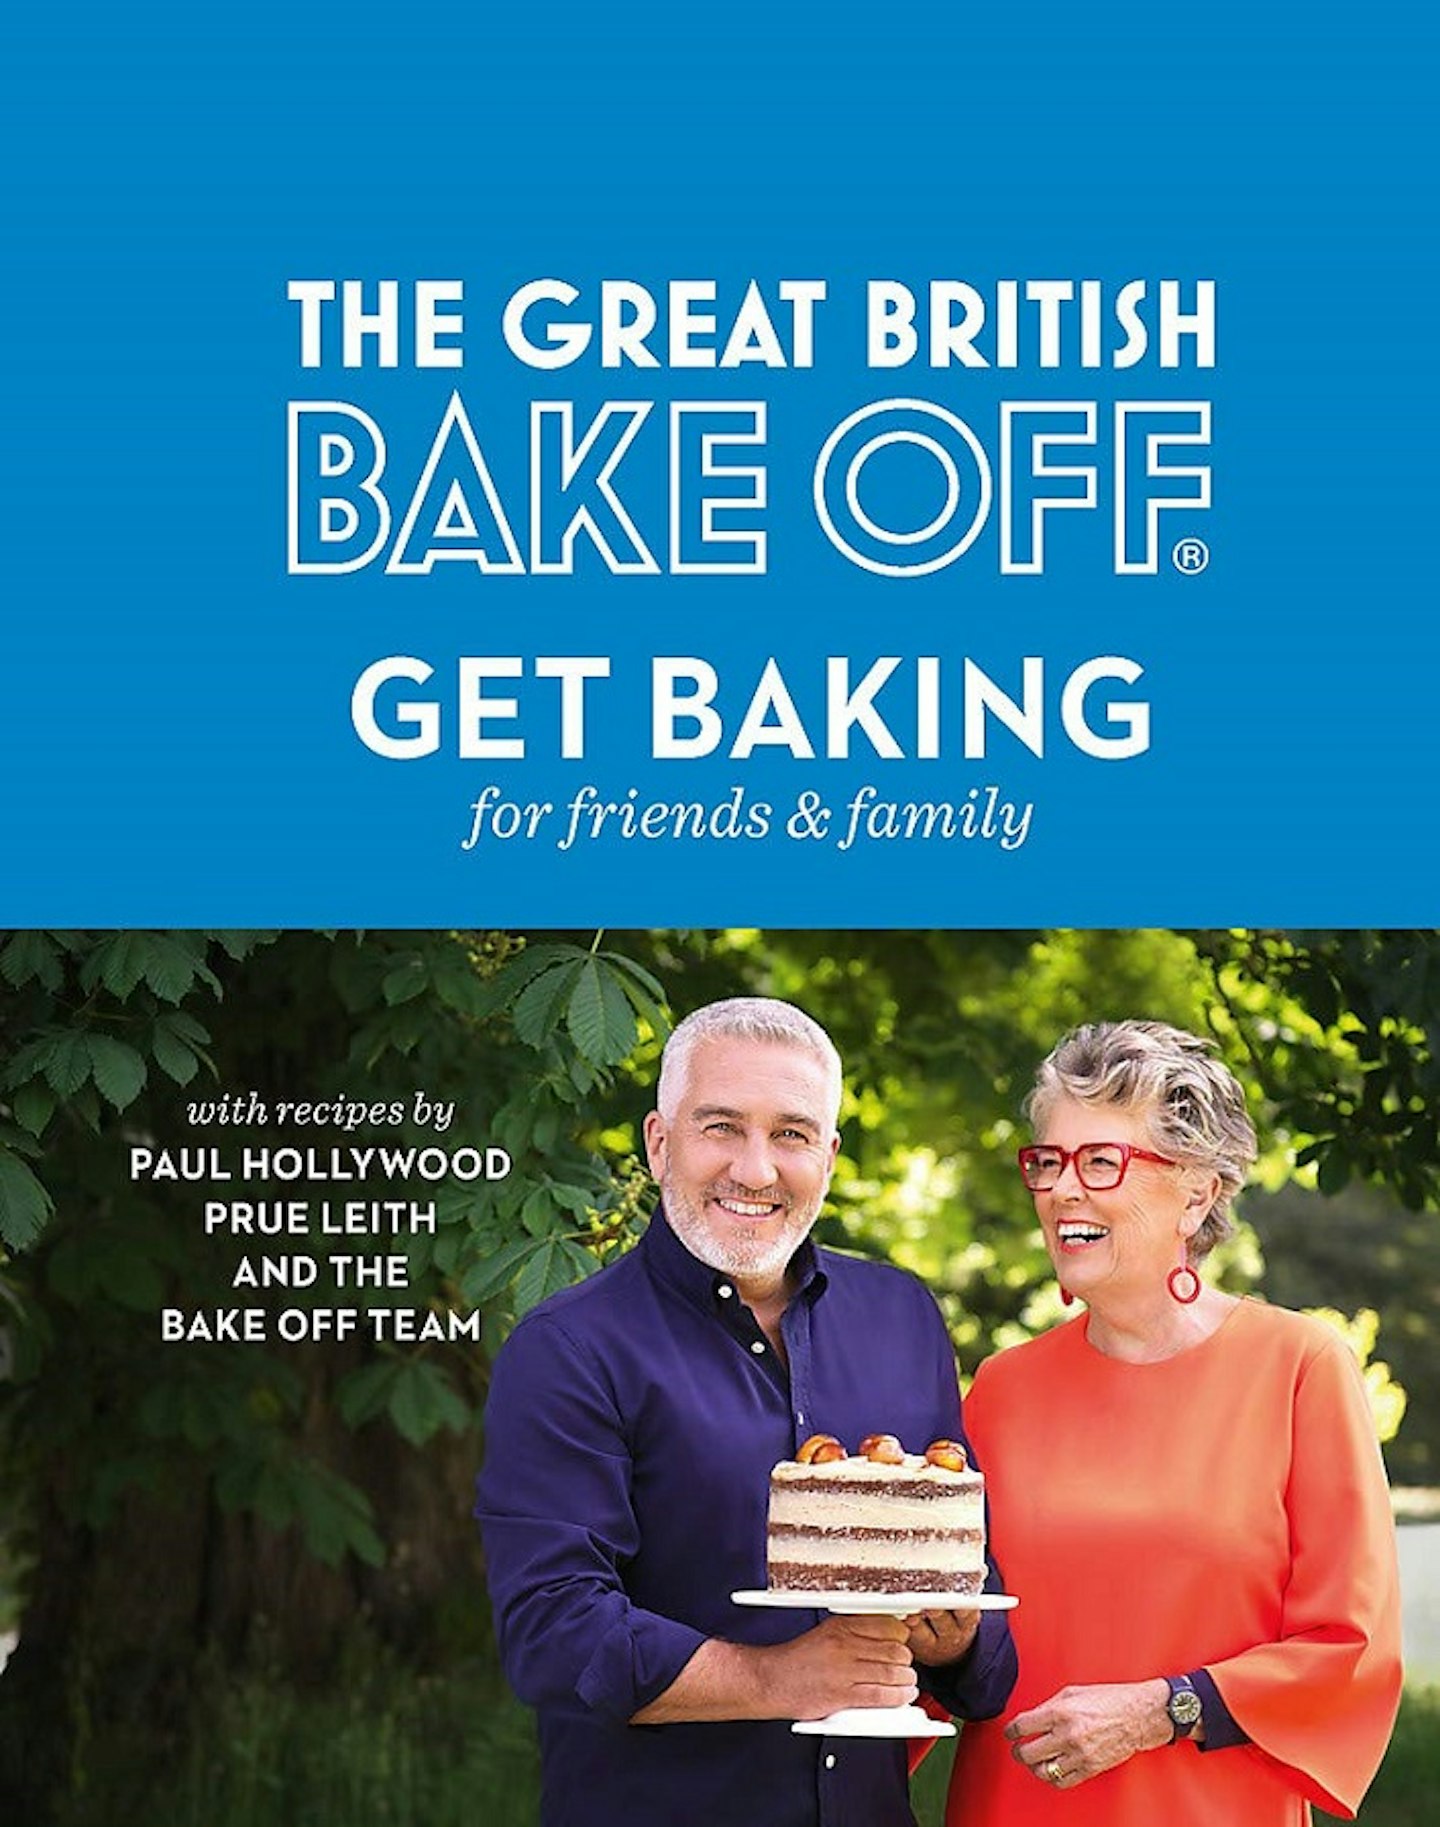 The Great British Bake Off: Get Baking for Friends and Family, 7.00